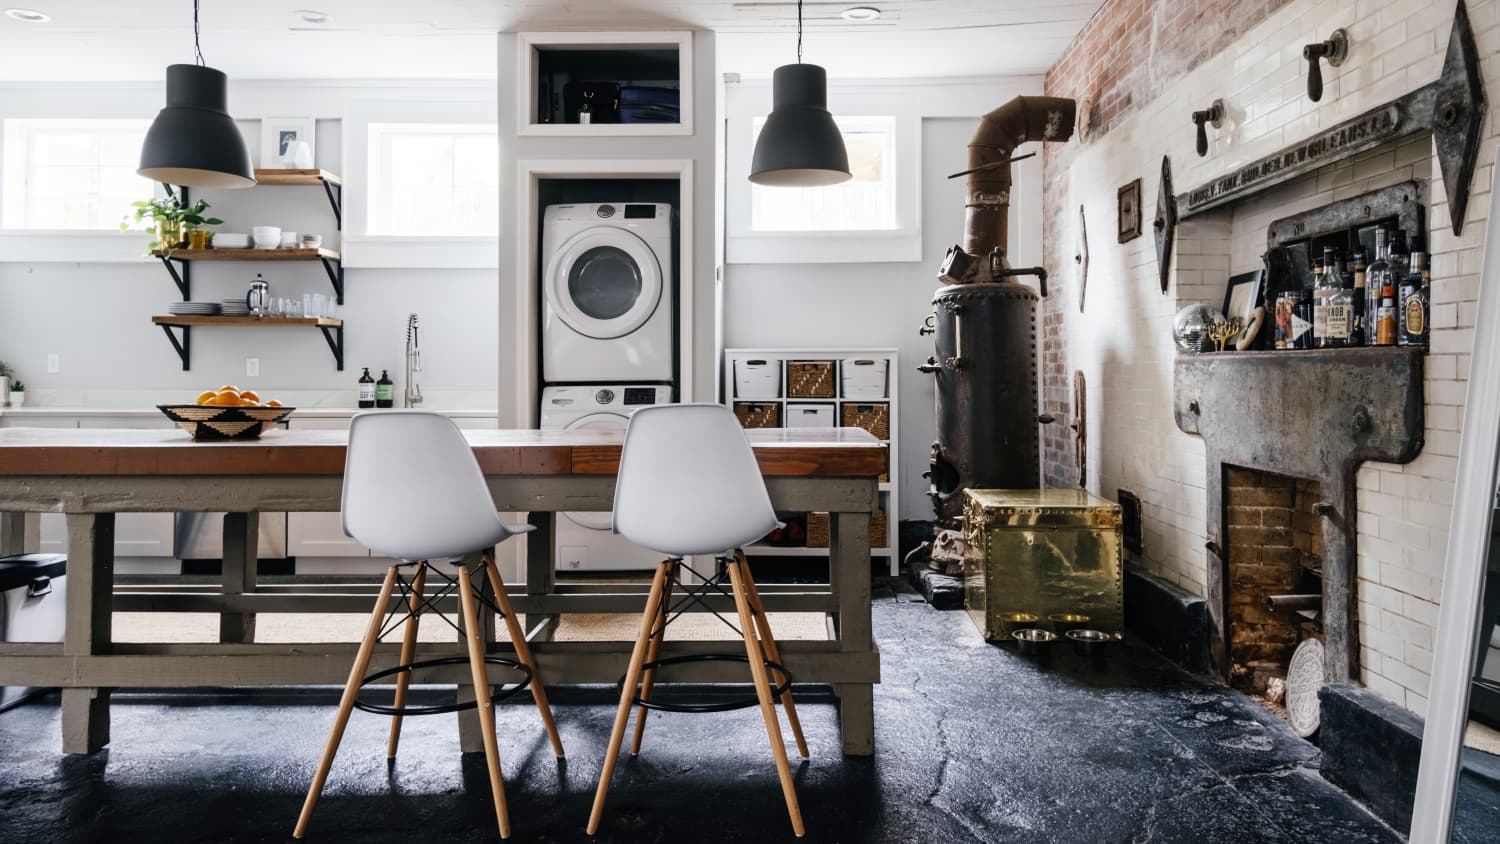 The Best Compact Washer and Dryer for a Small Apartment